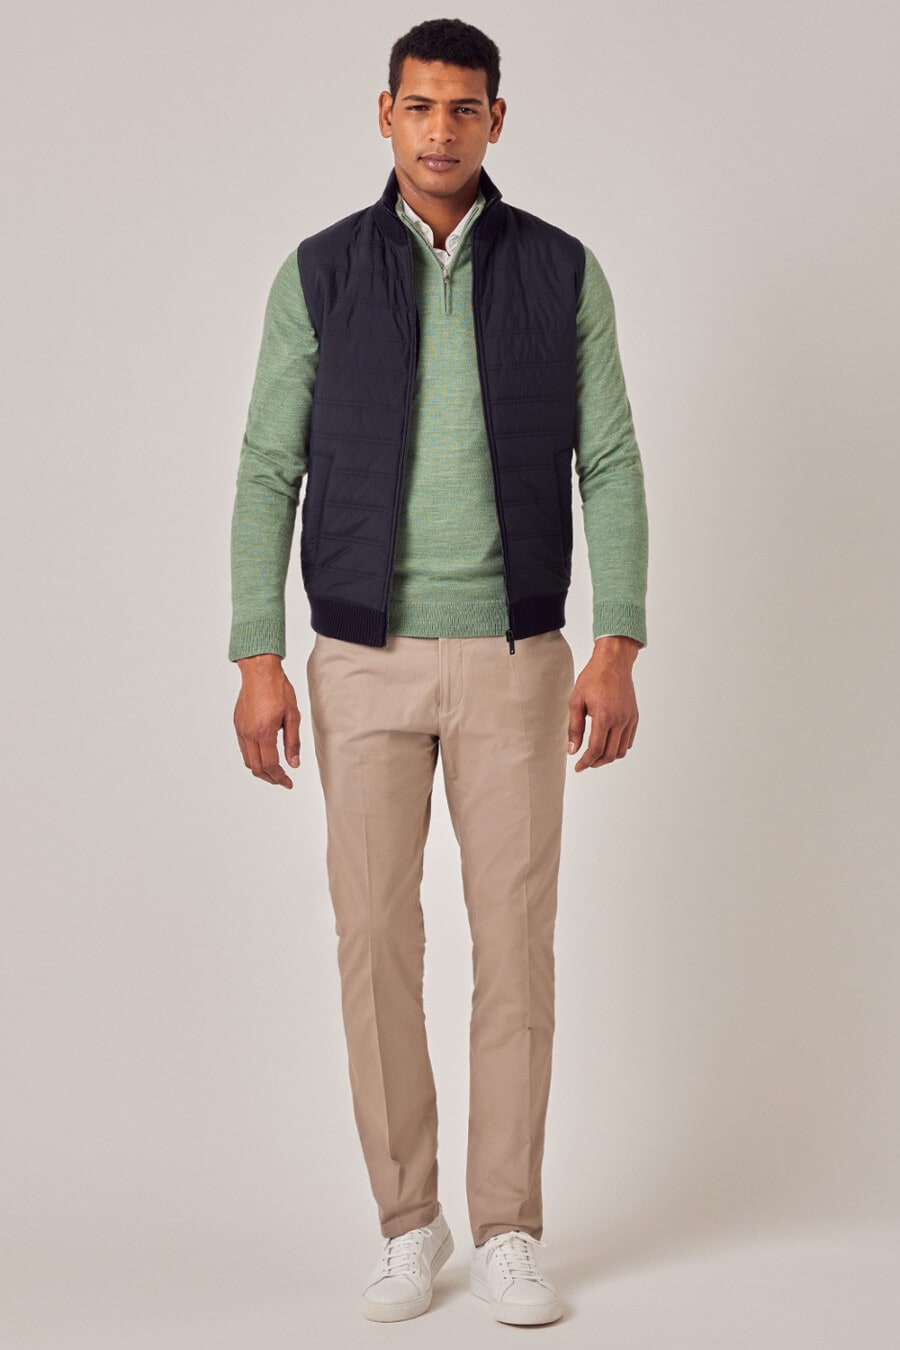 Men's khaki pants, white shirt, green quarter-zip sweater, navy vest and white sneakers outfit